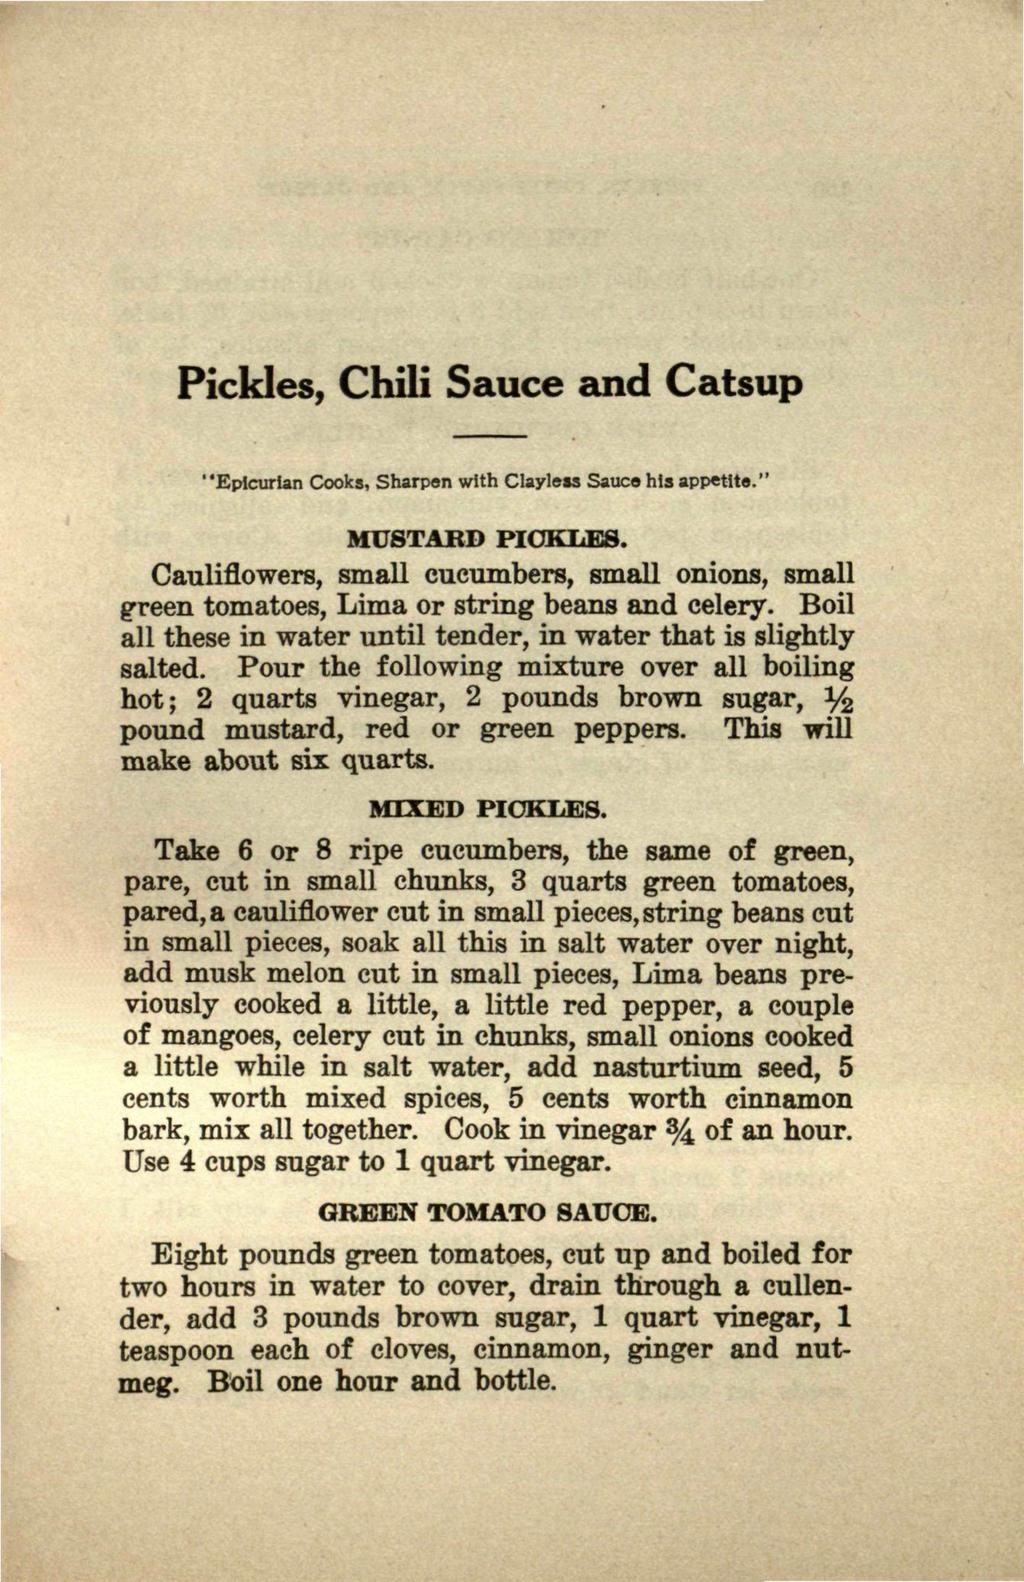 Pickles, Chili Sauce and Catsup "Eplcurian Cooks, Sharpen with Clayless Sauce his appetite." MUSTARD PICKLES.